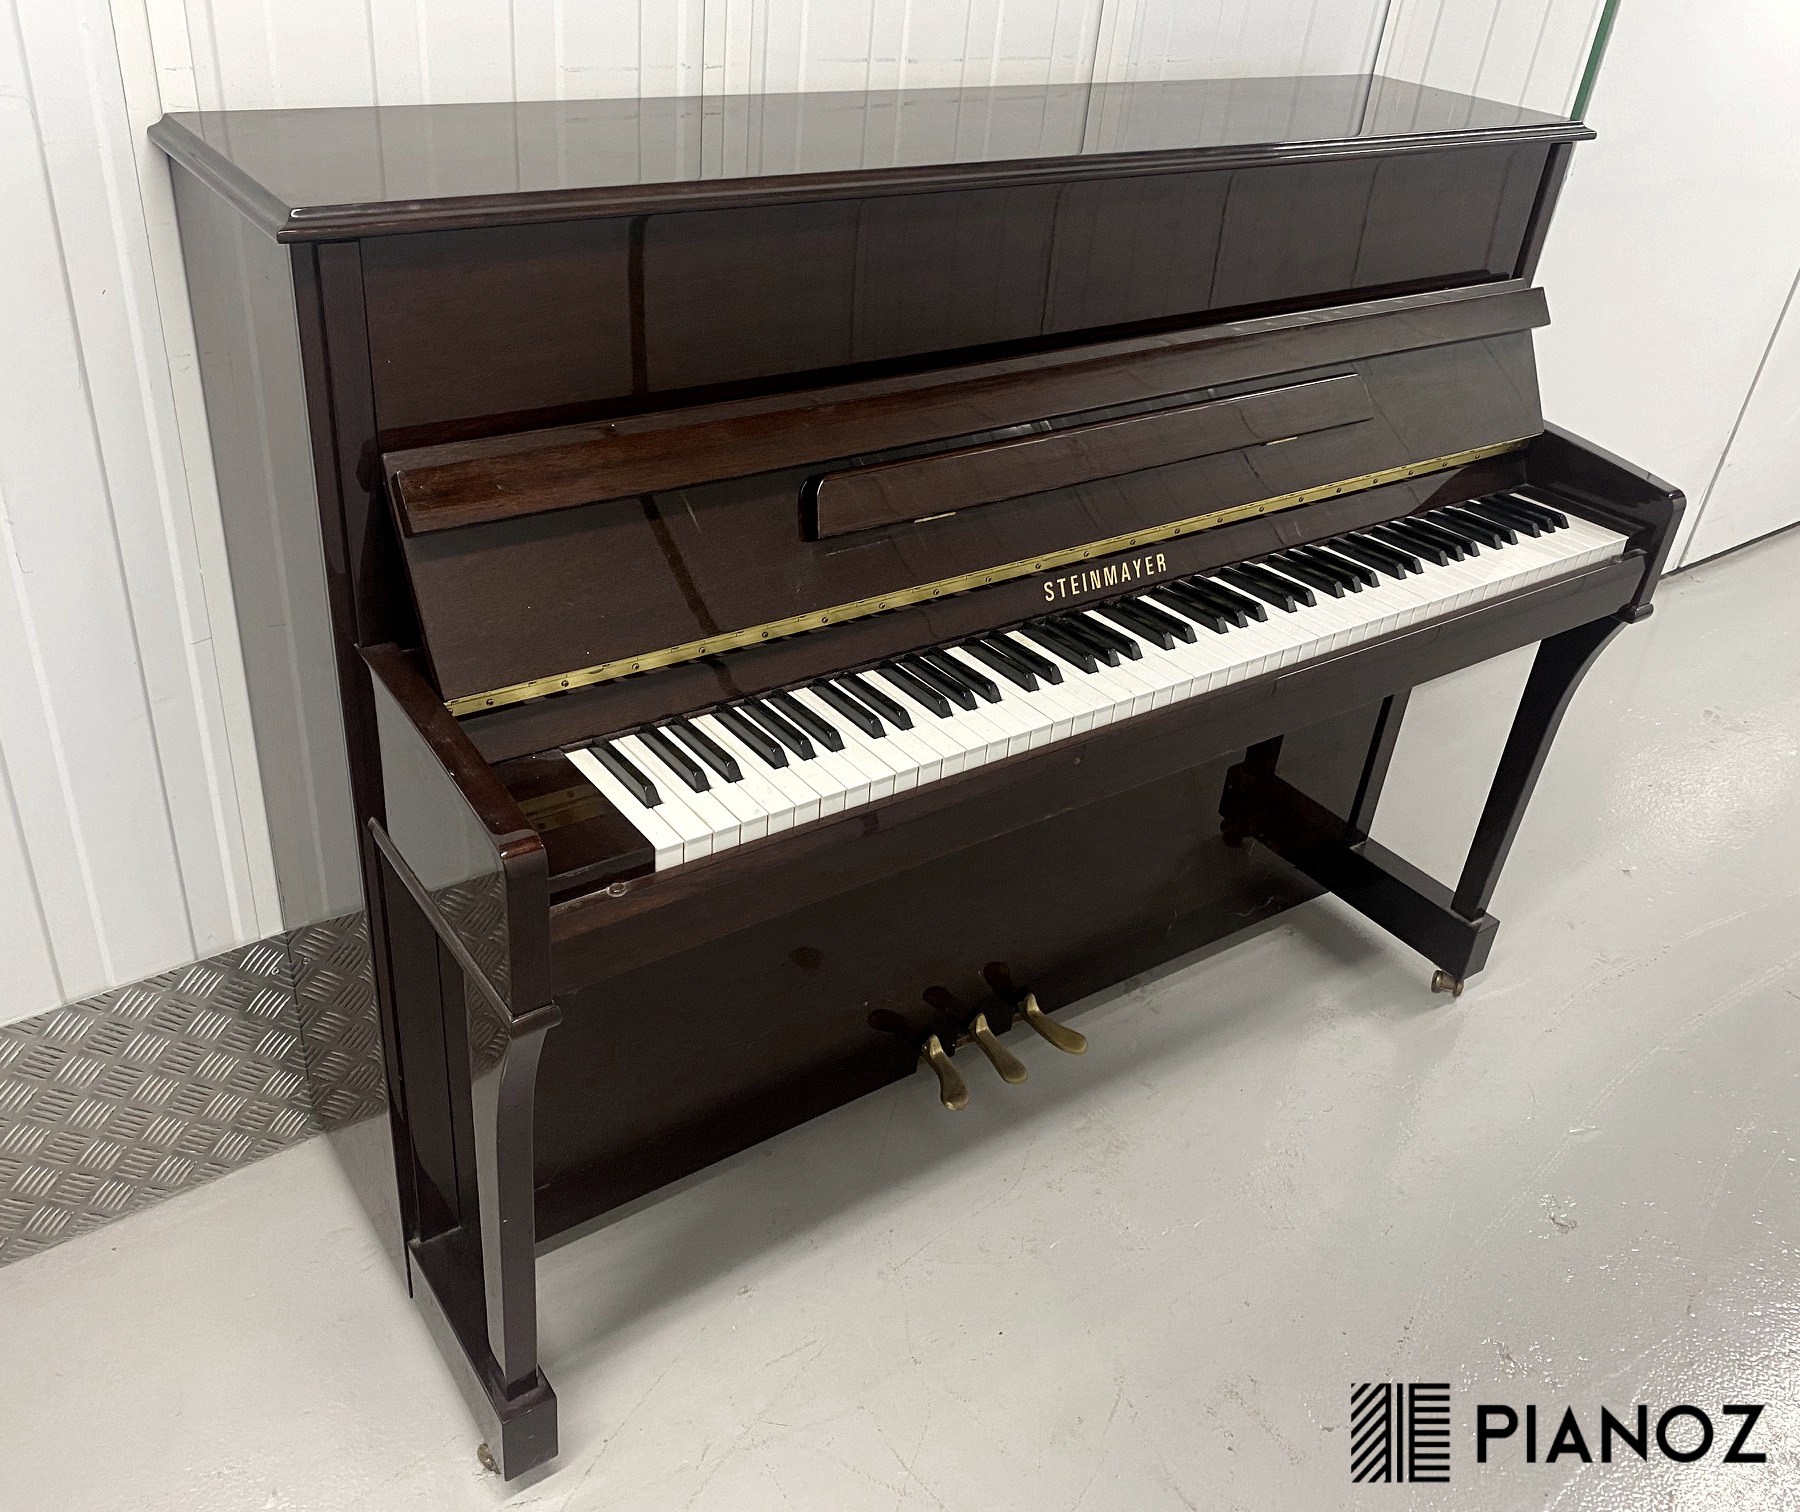 Steinmayer 110 Upright Piano piano for sale in UK